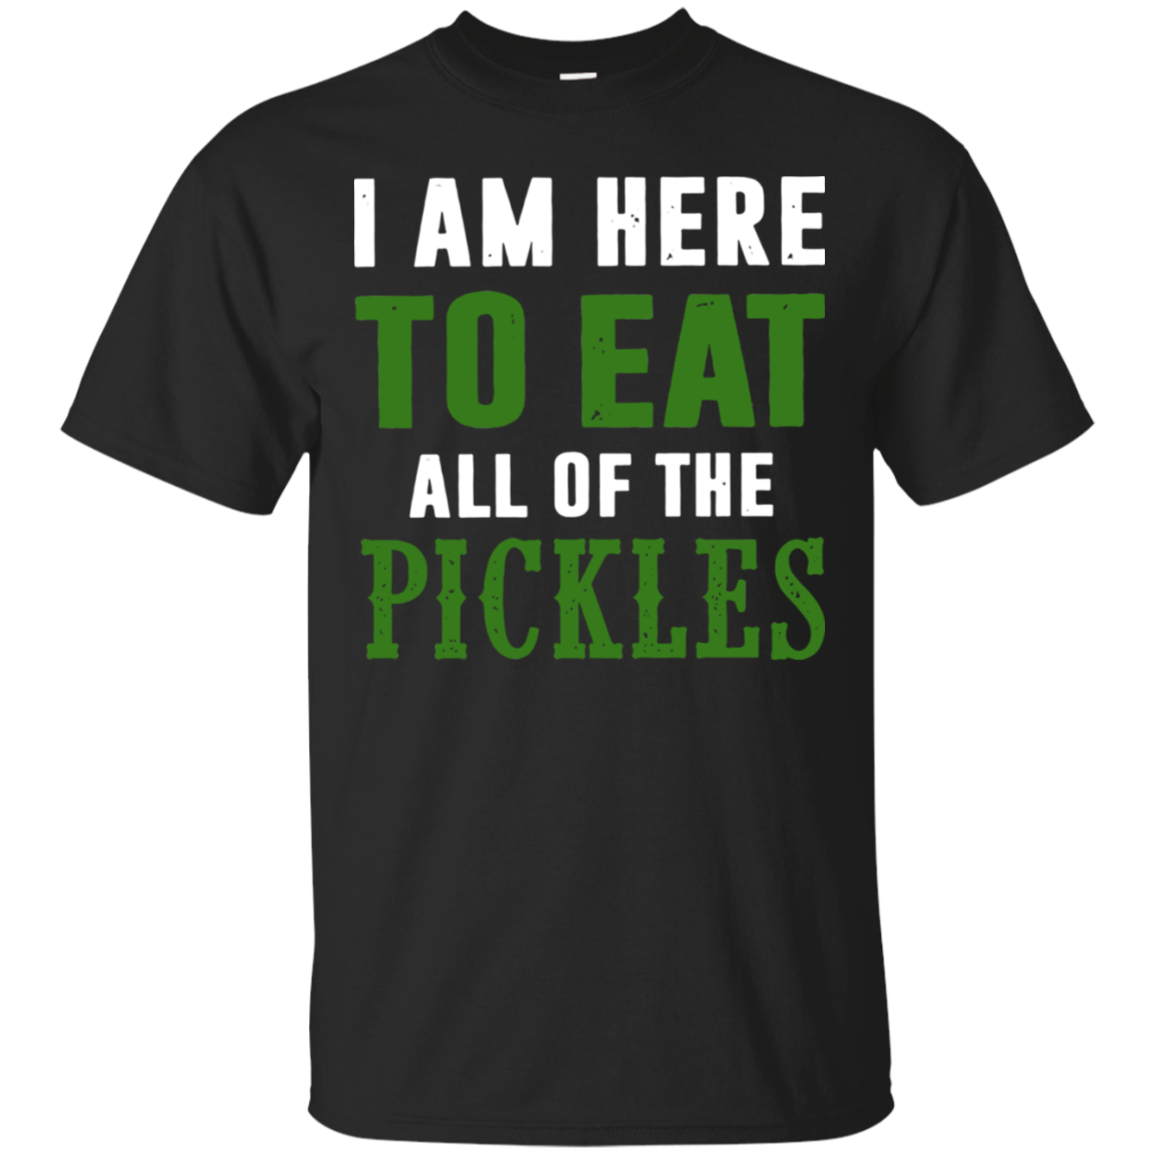 I'm Here To Eat All The Pickles Funny Black T-Shirt - T-Shirts, Tank Tops